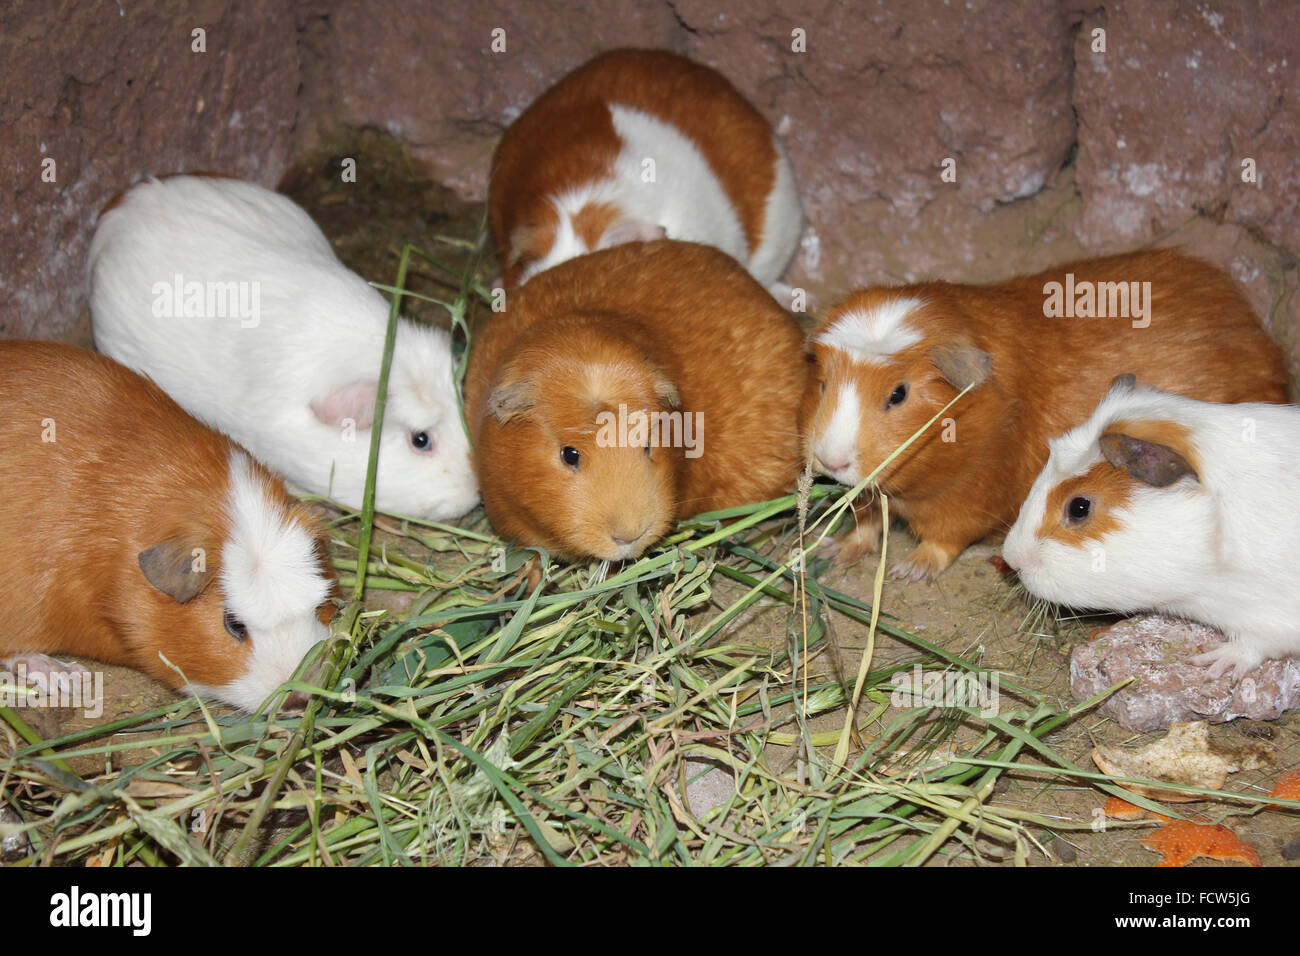 Guinea Pigs Being Bred For Eating In Peru Stock Photo